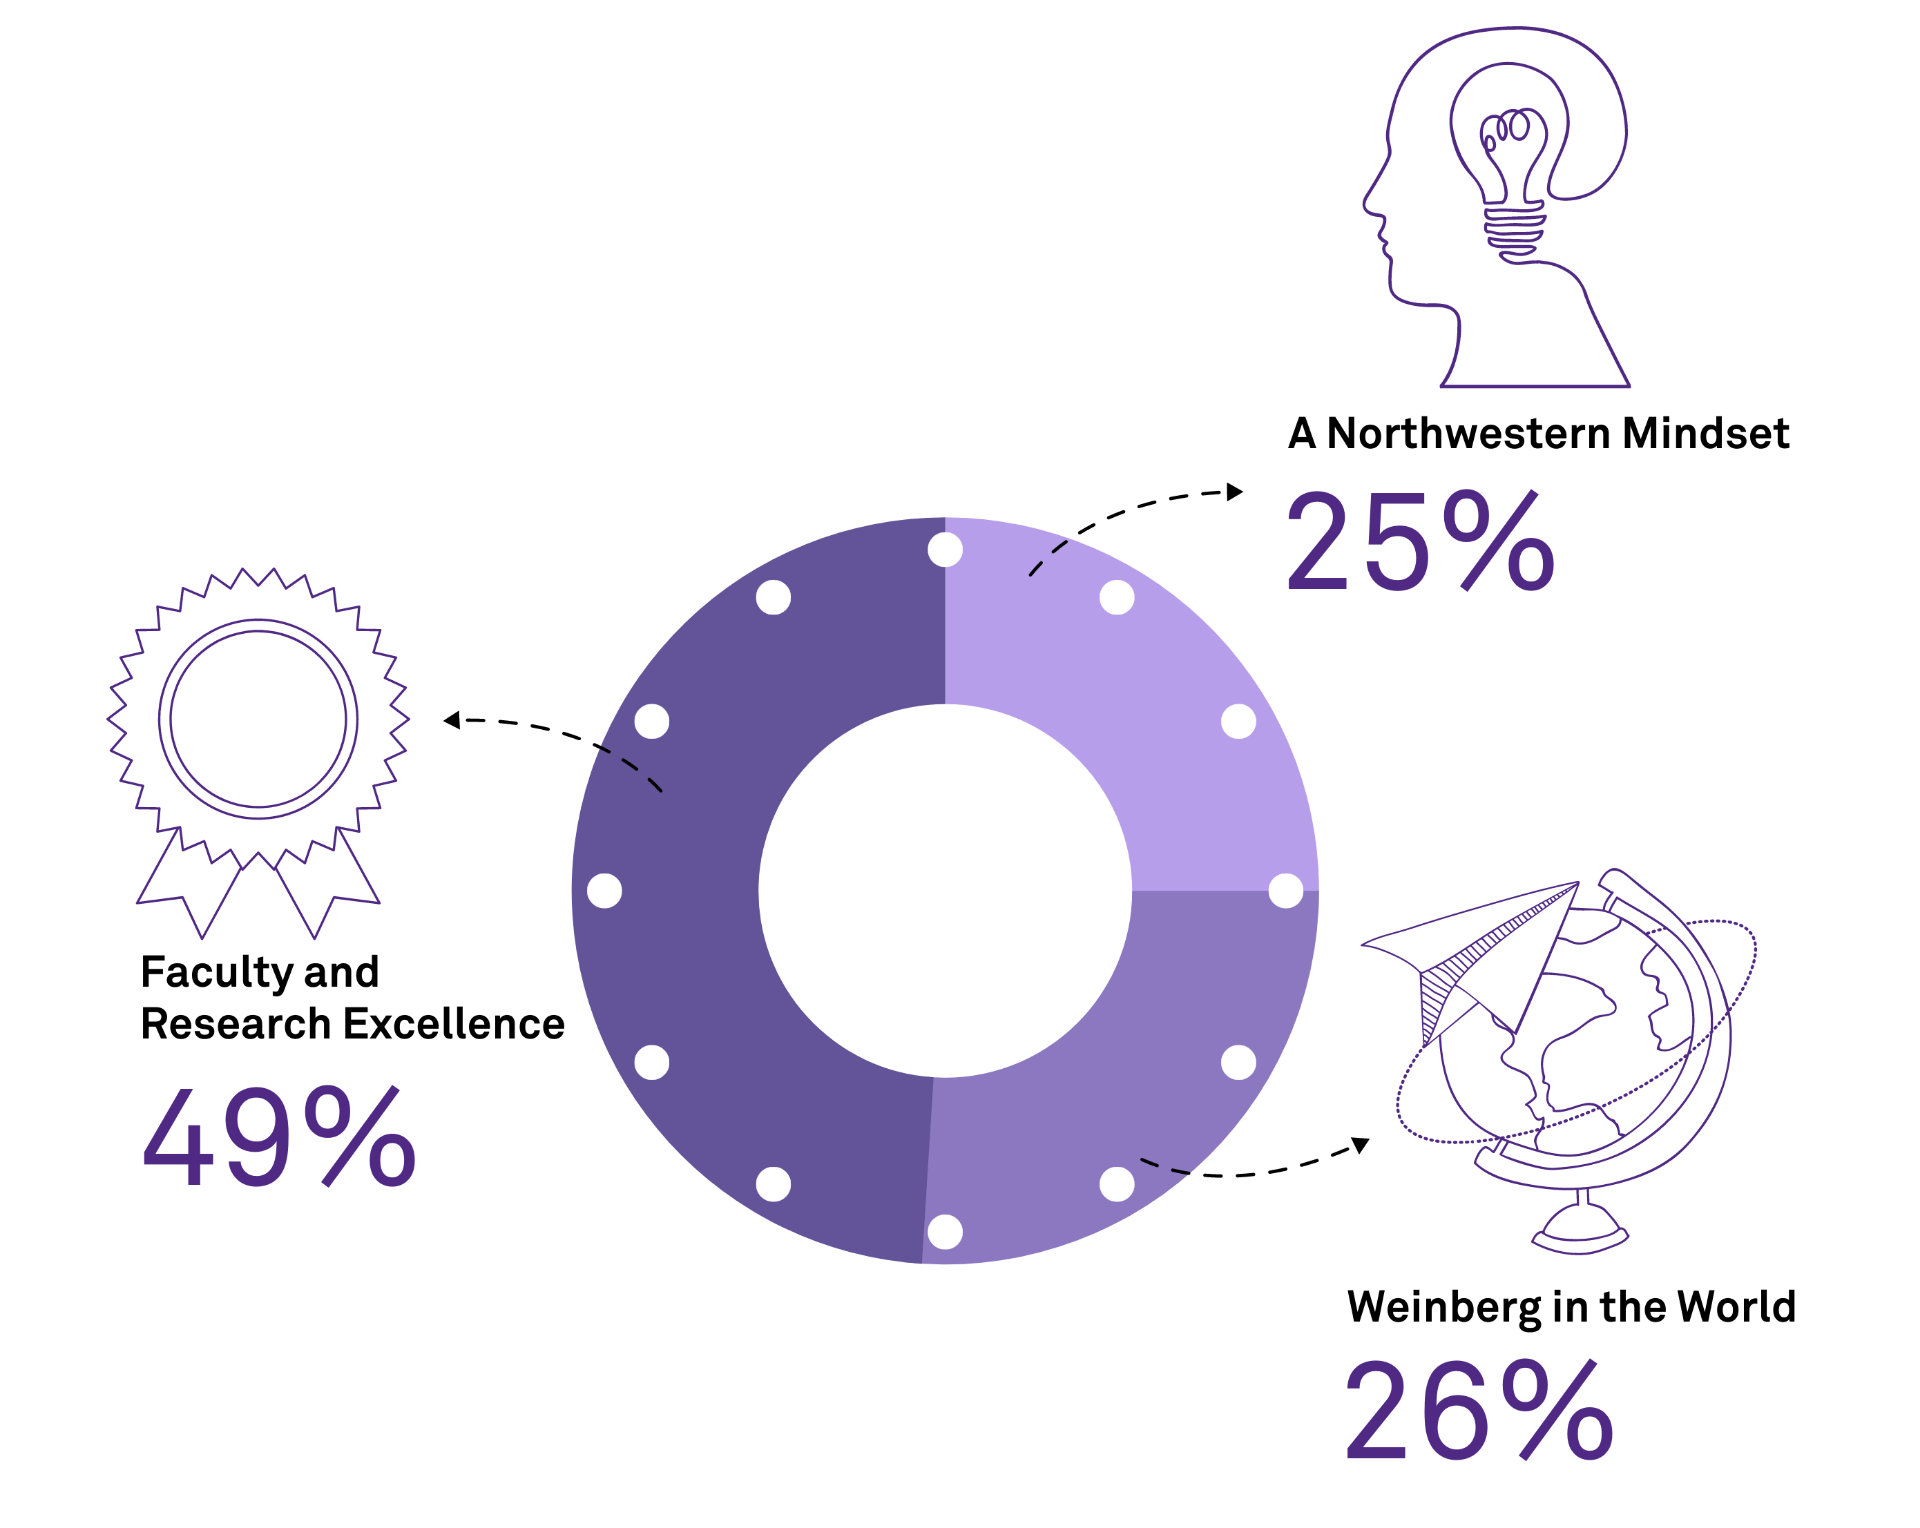 Pie chart: 25% A Northwestern Mindset, 49% Faculty and Research Excellence, 26% Weinberg in the World